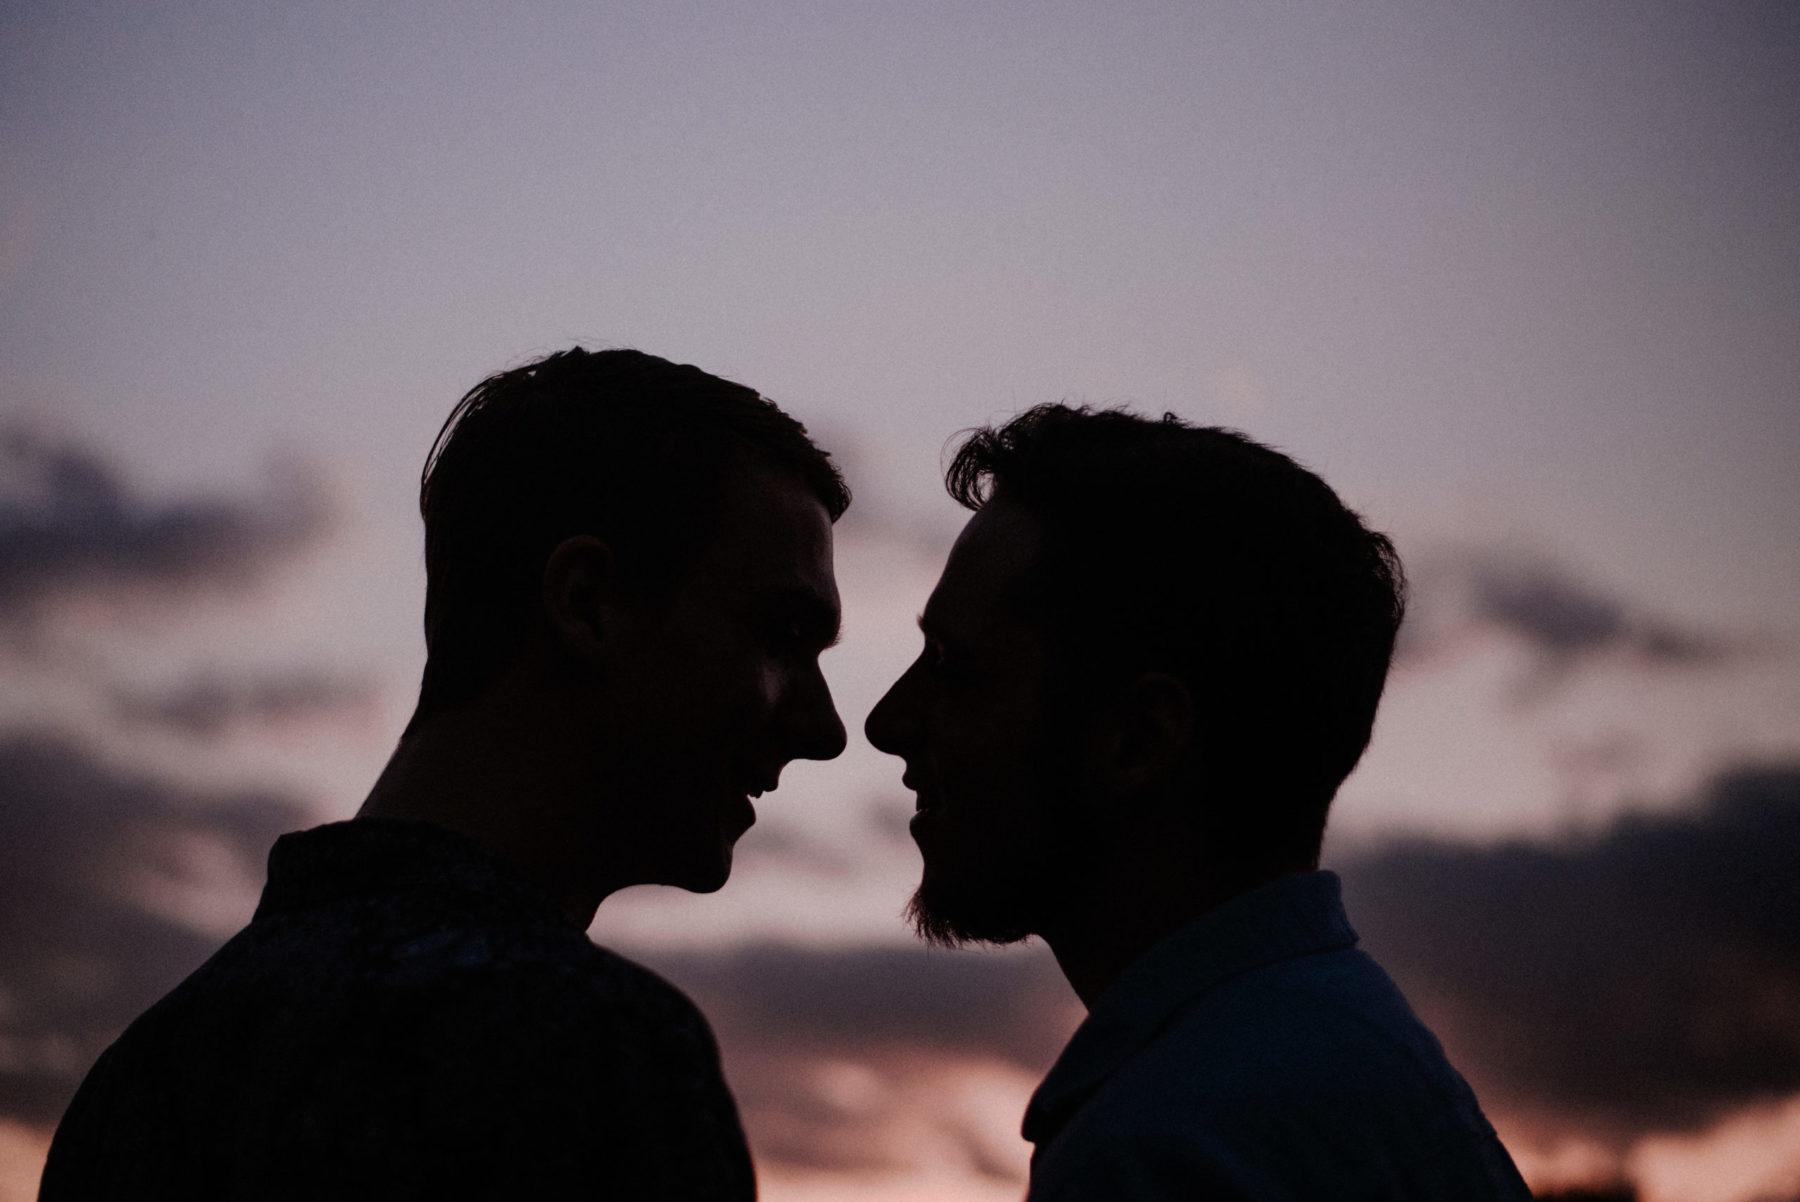 A romantic silhouette of a couple facing each other closely at sunset, capturing their intimate connection against the backdrop of a twilight sky.